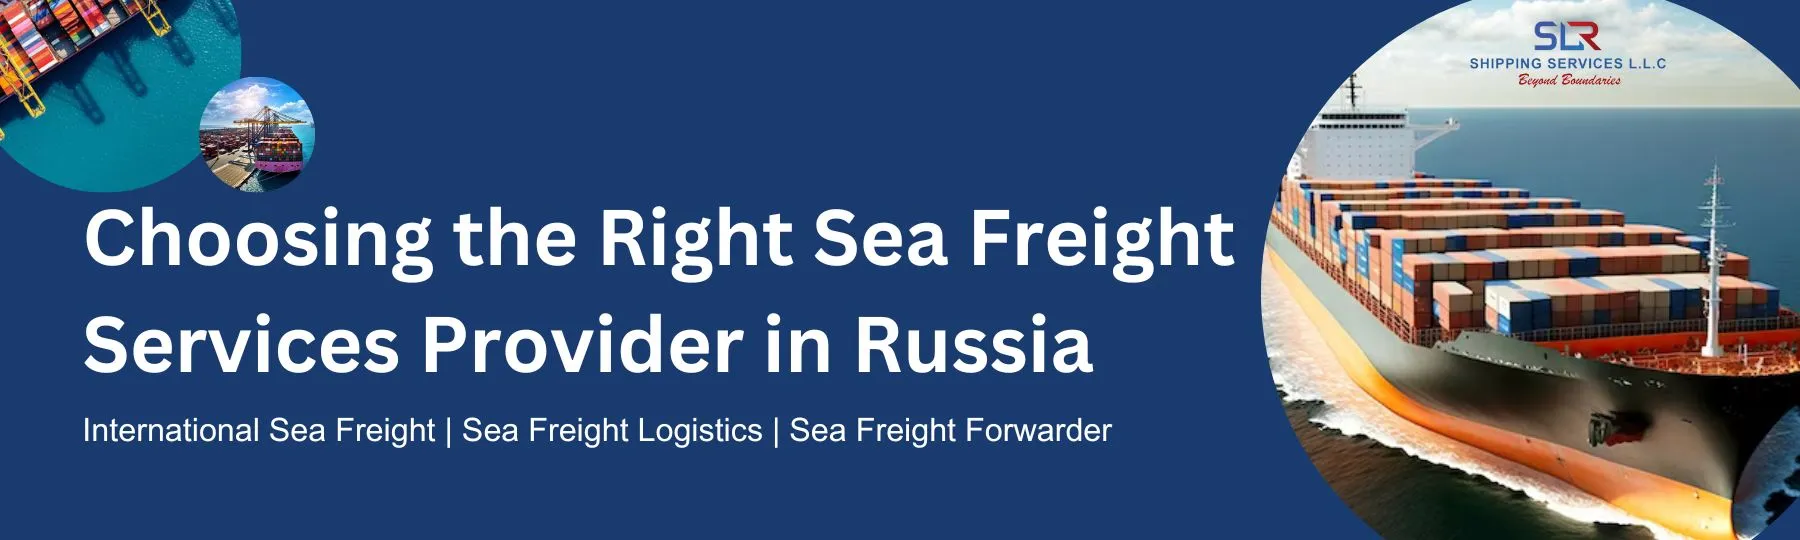 Cost-Effective Sea Freight Services in Russia for Global Shipping